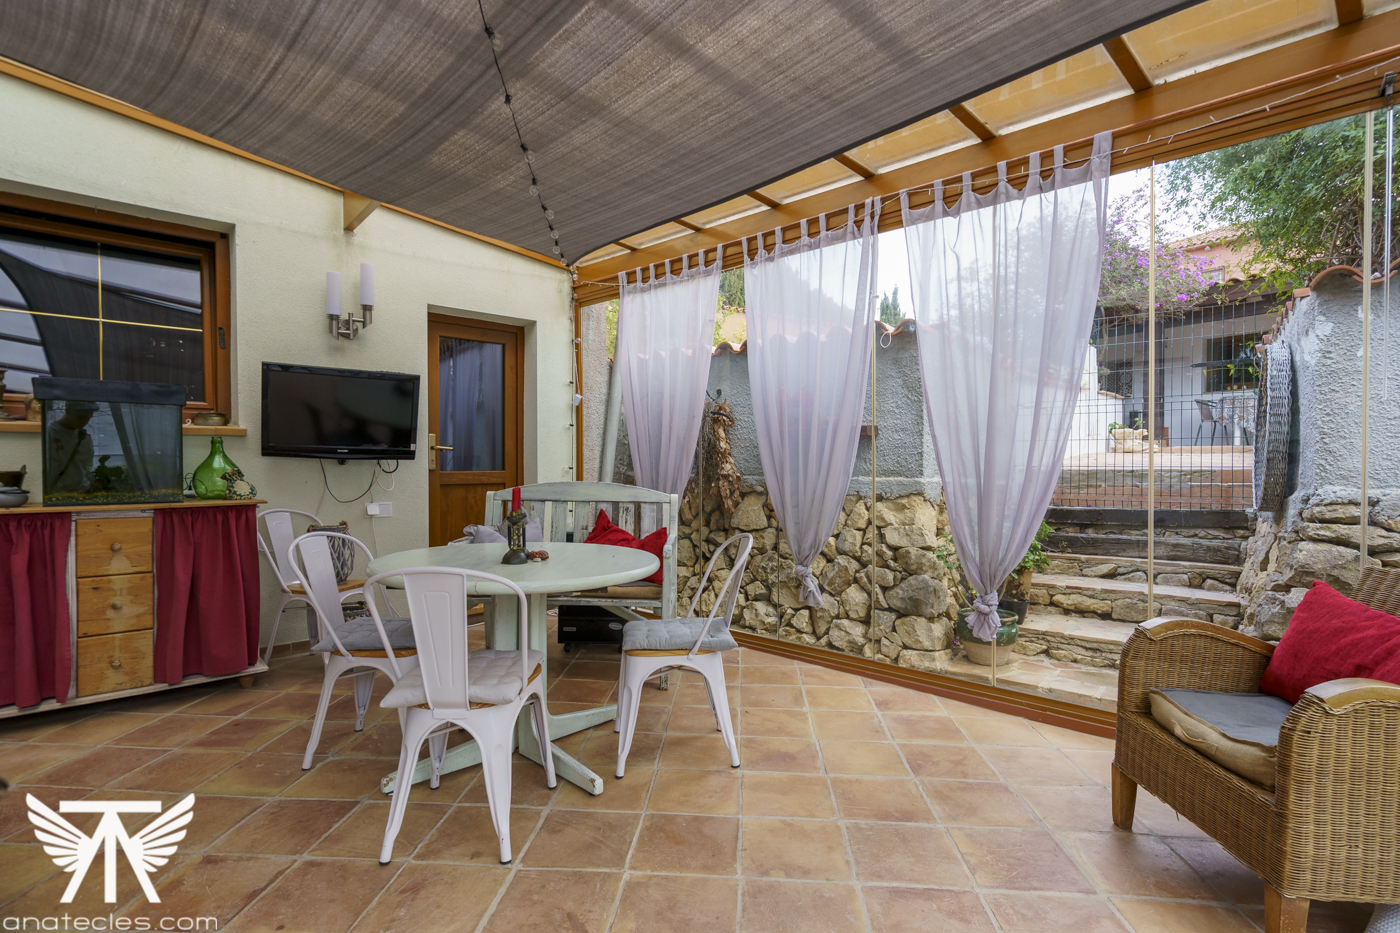 Exclusive Finca for Sale in Altea: Discover Your Dream Property